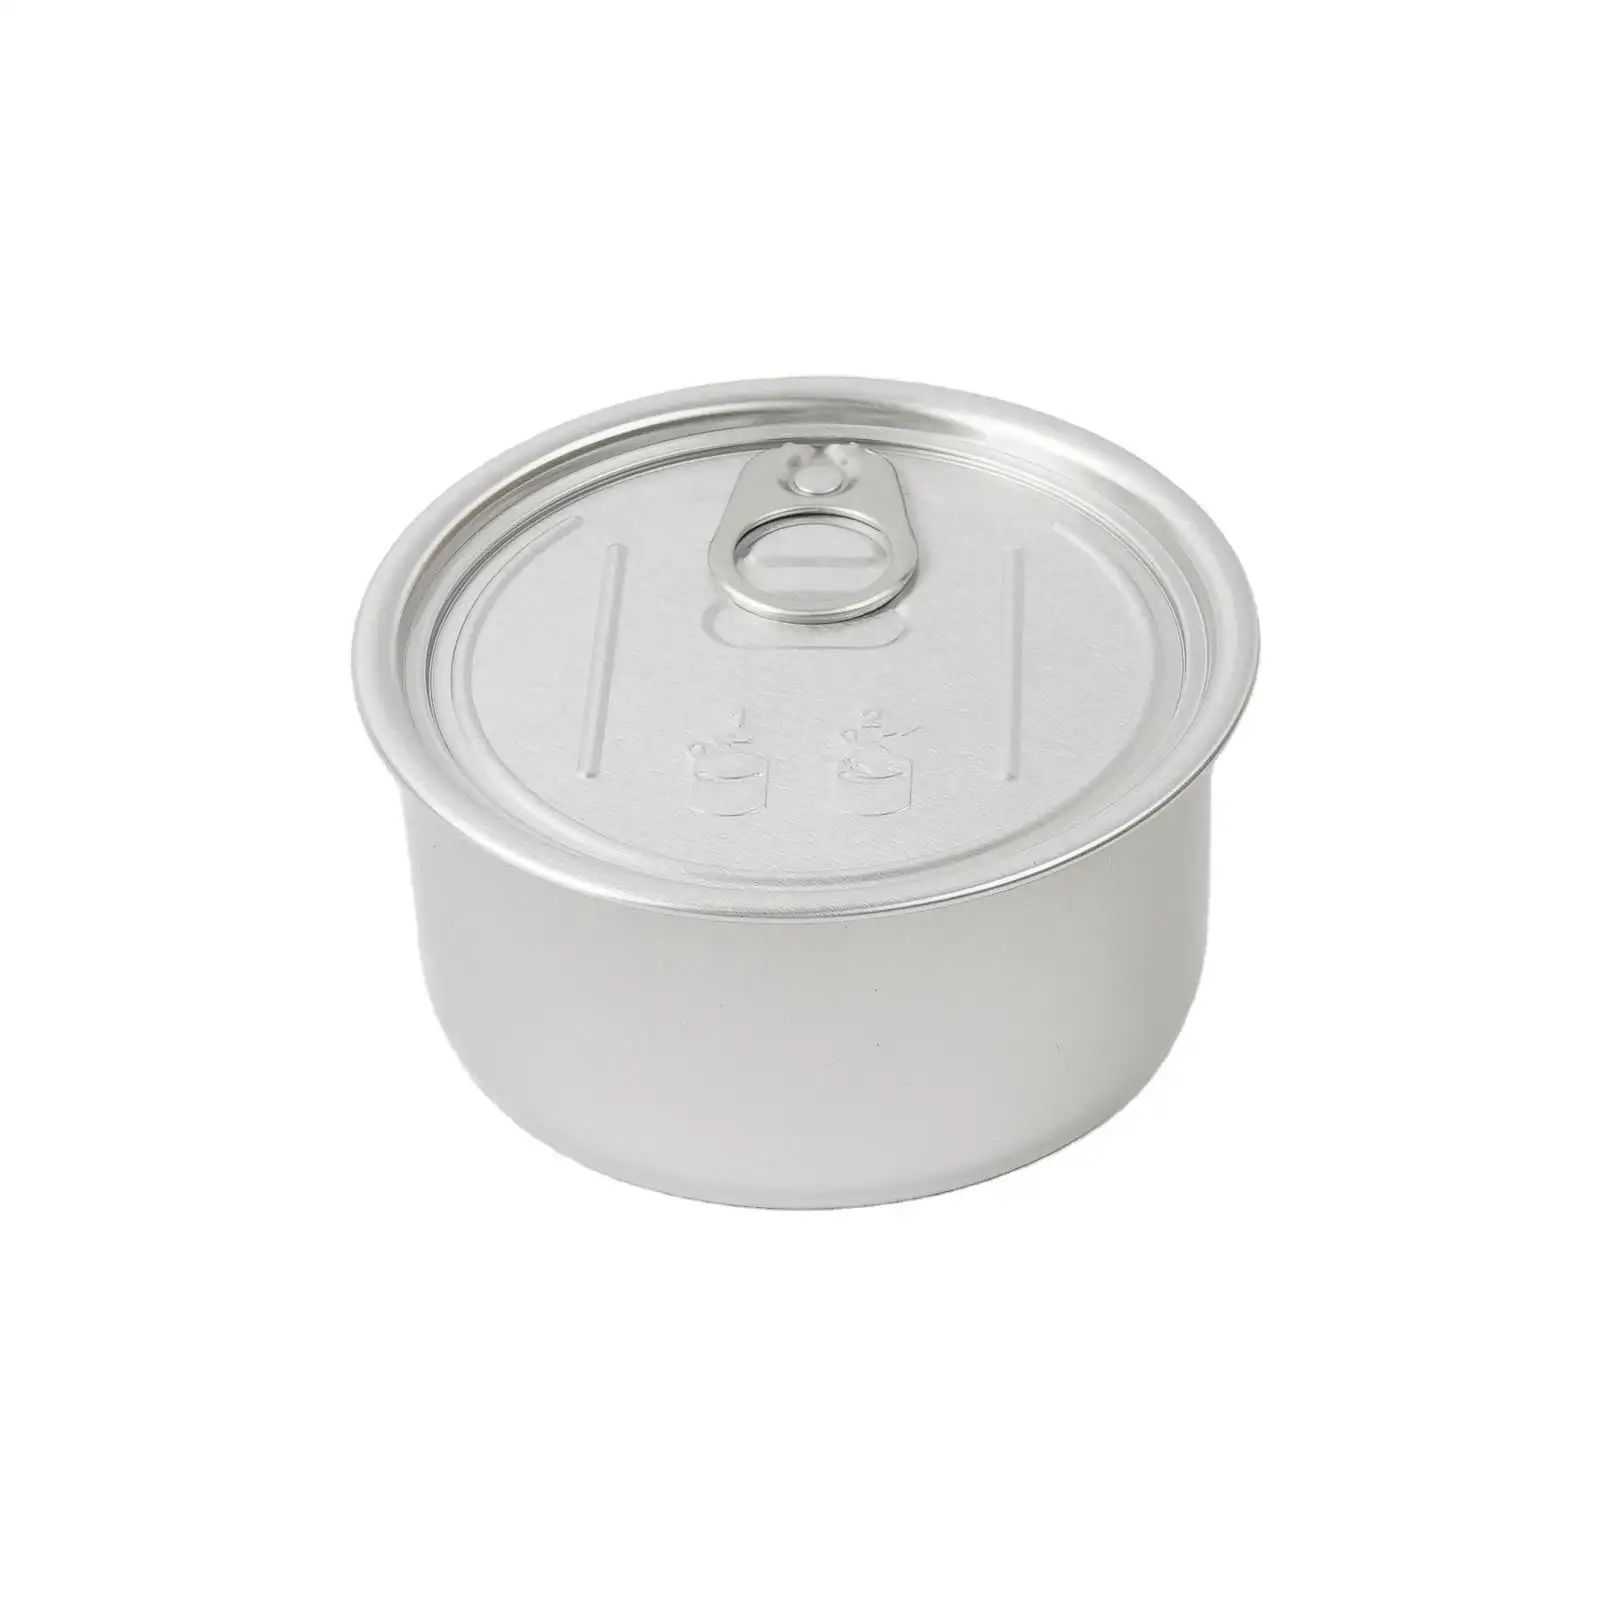 OEM 100ml/3.5g Hand Seal Tuna Can Eco-Friendly Refillable Silver Aluminum Metal Jar with Lid Best Bulk Price No Tools Needed